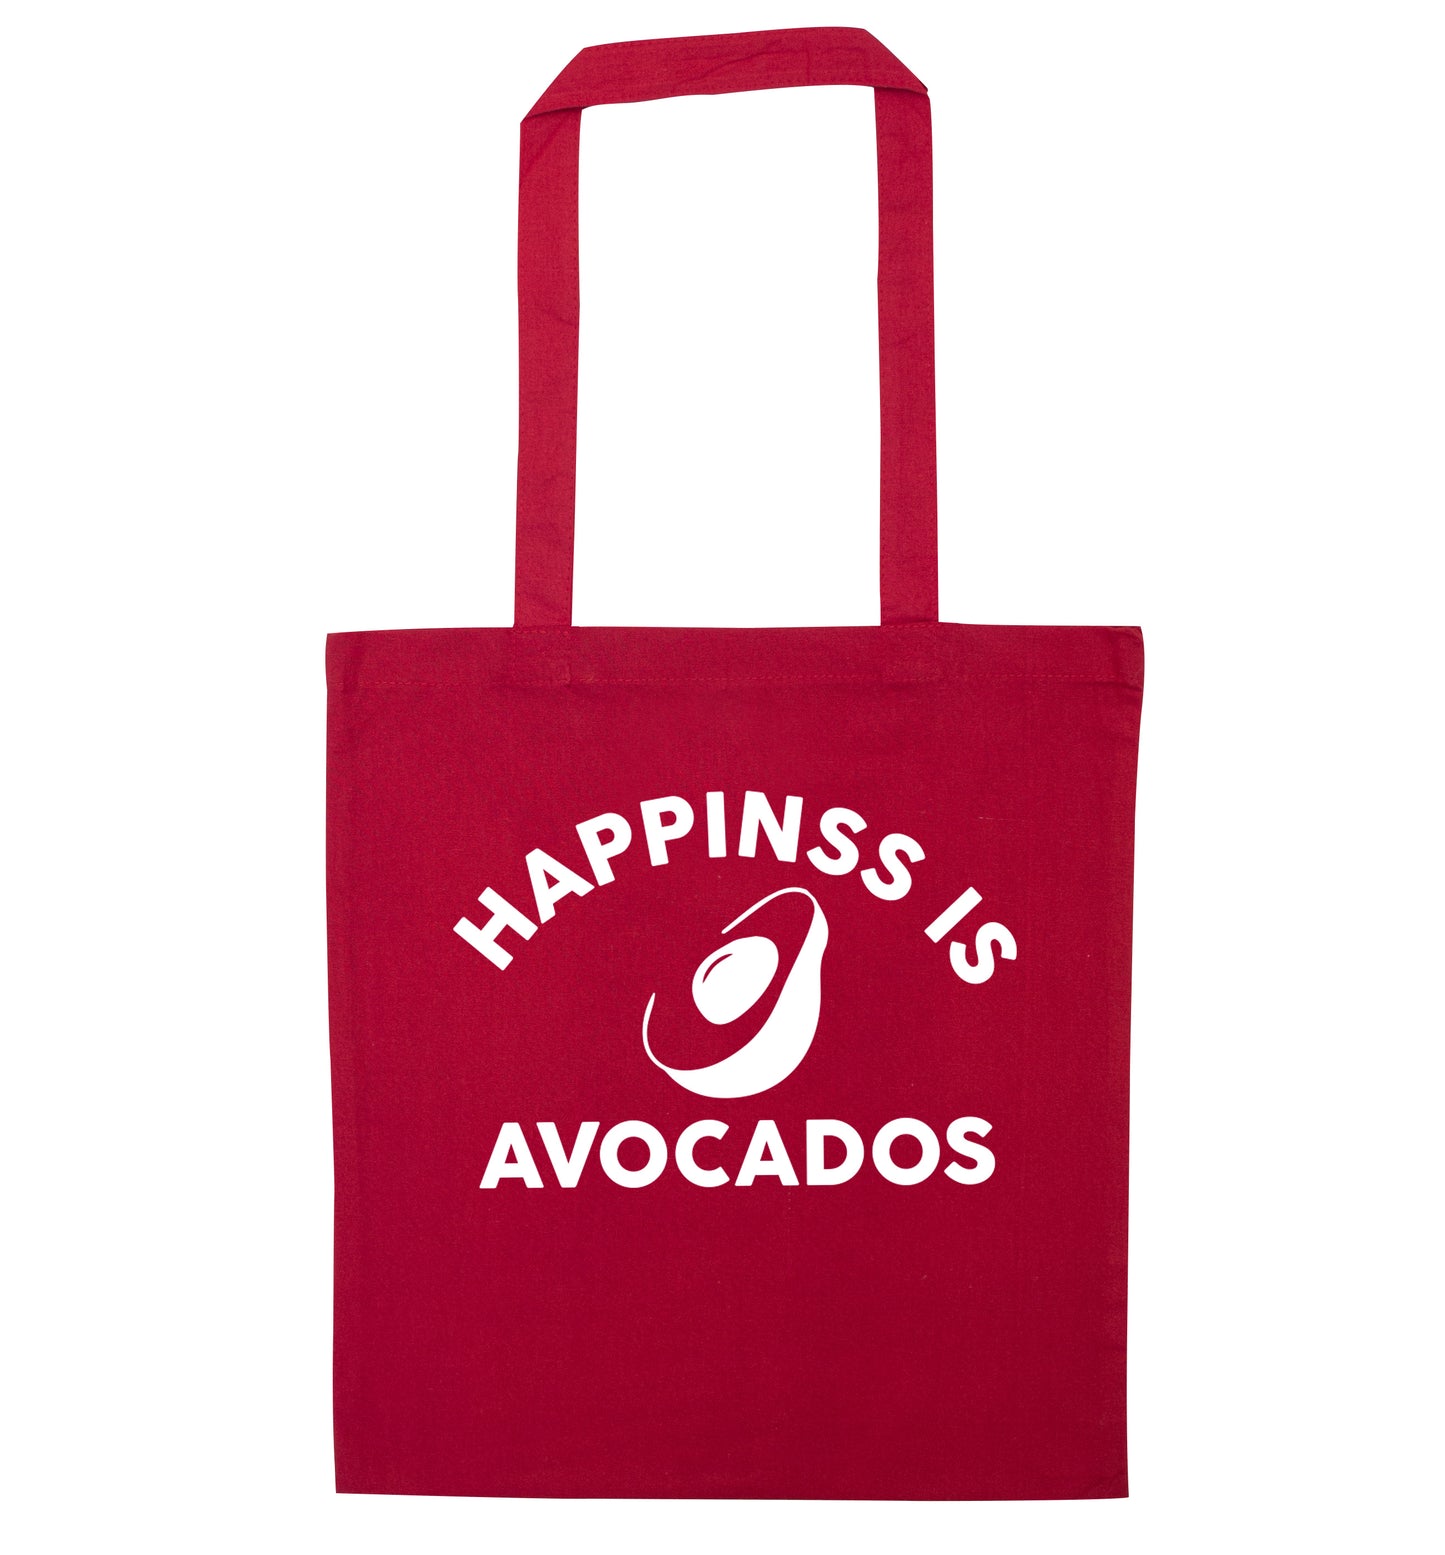 Happiness is avocados red tote bag